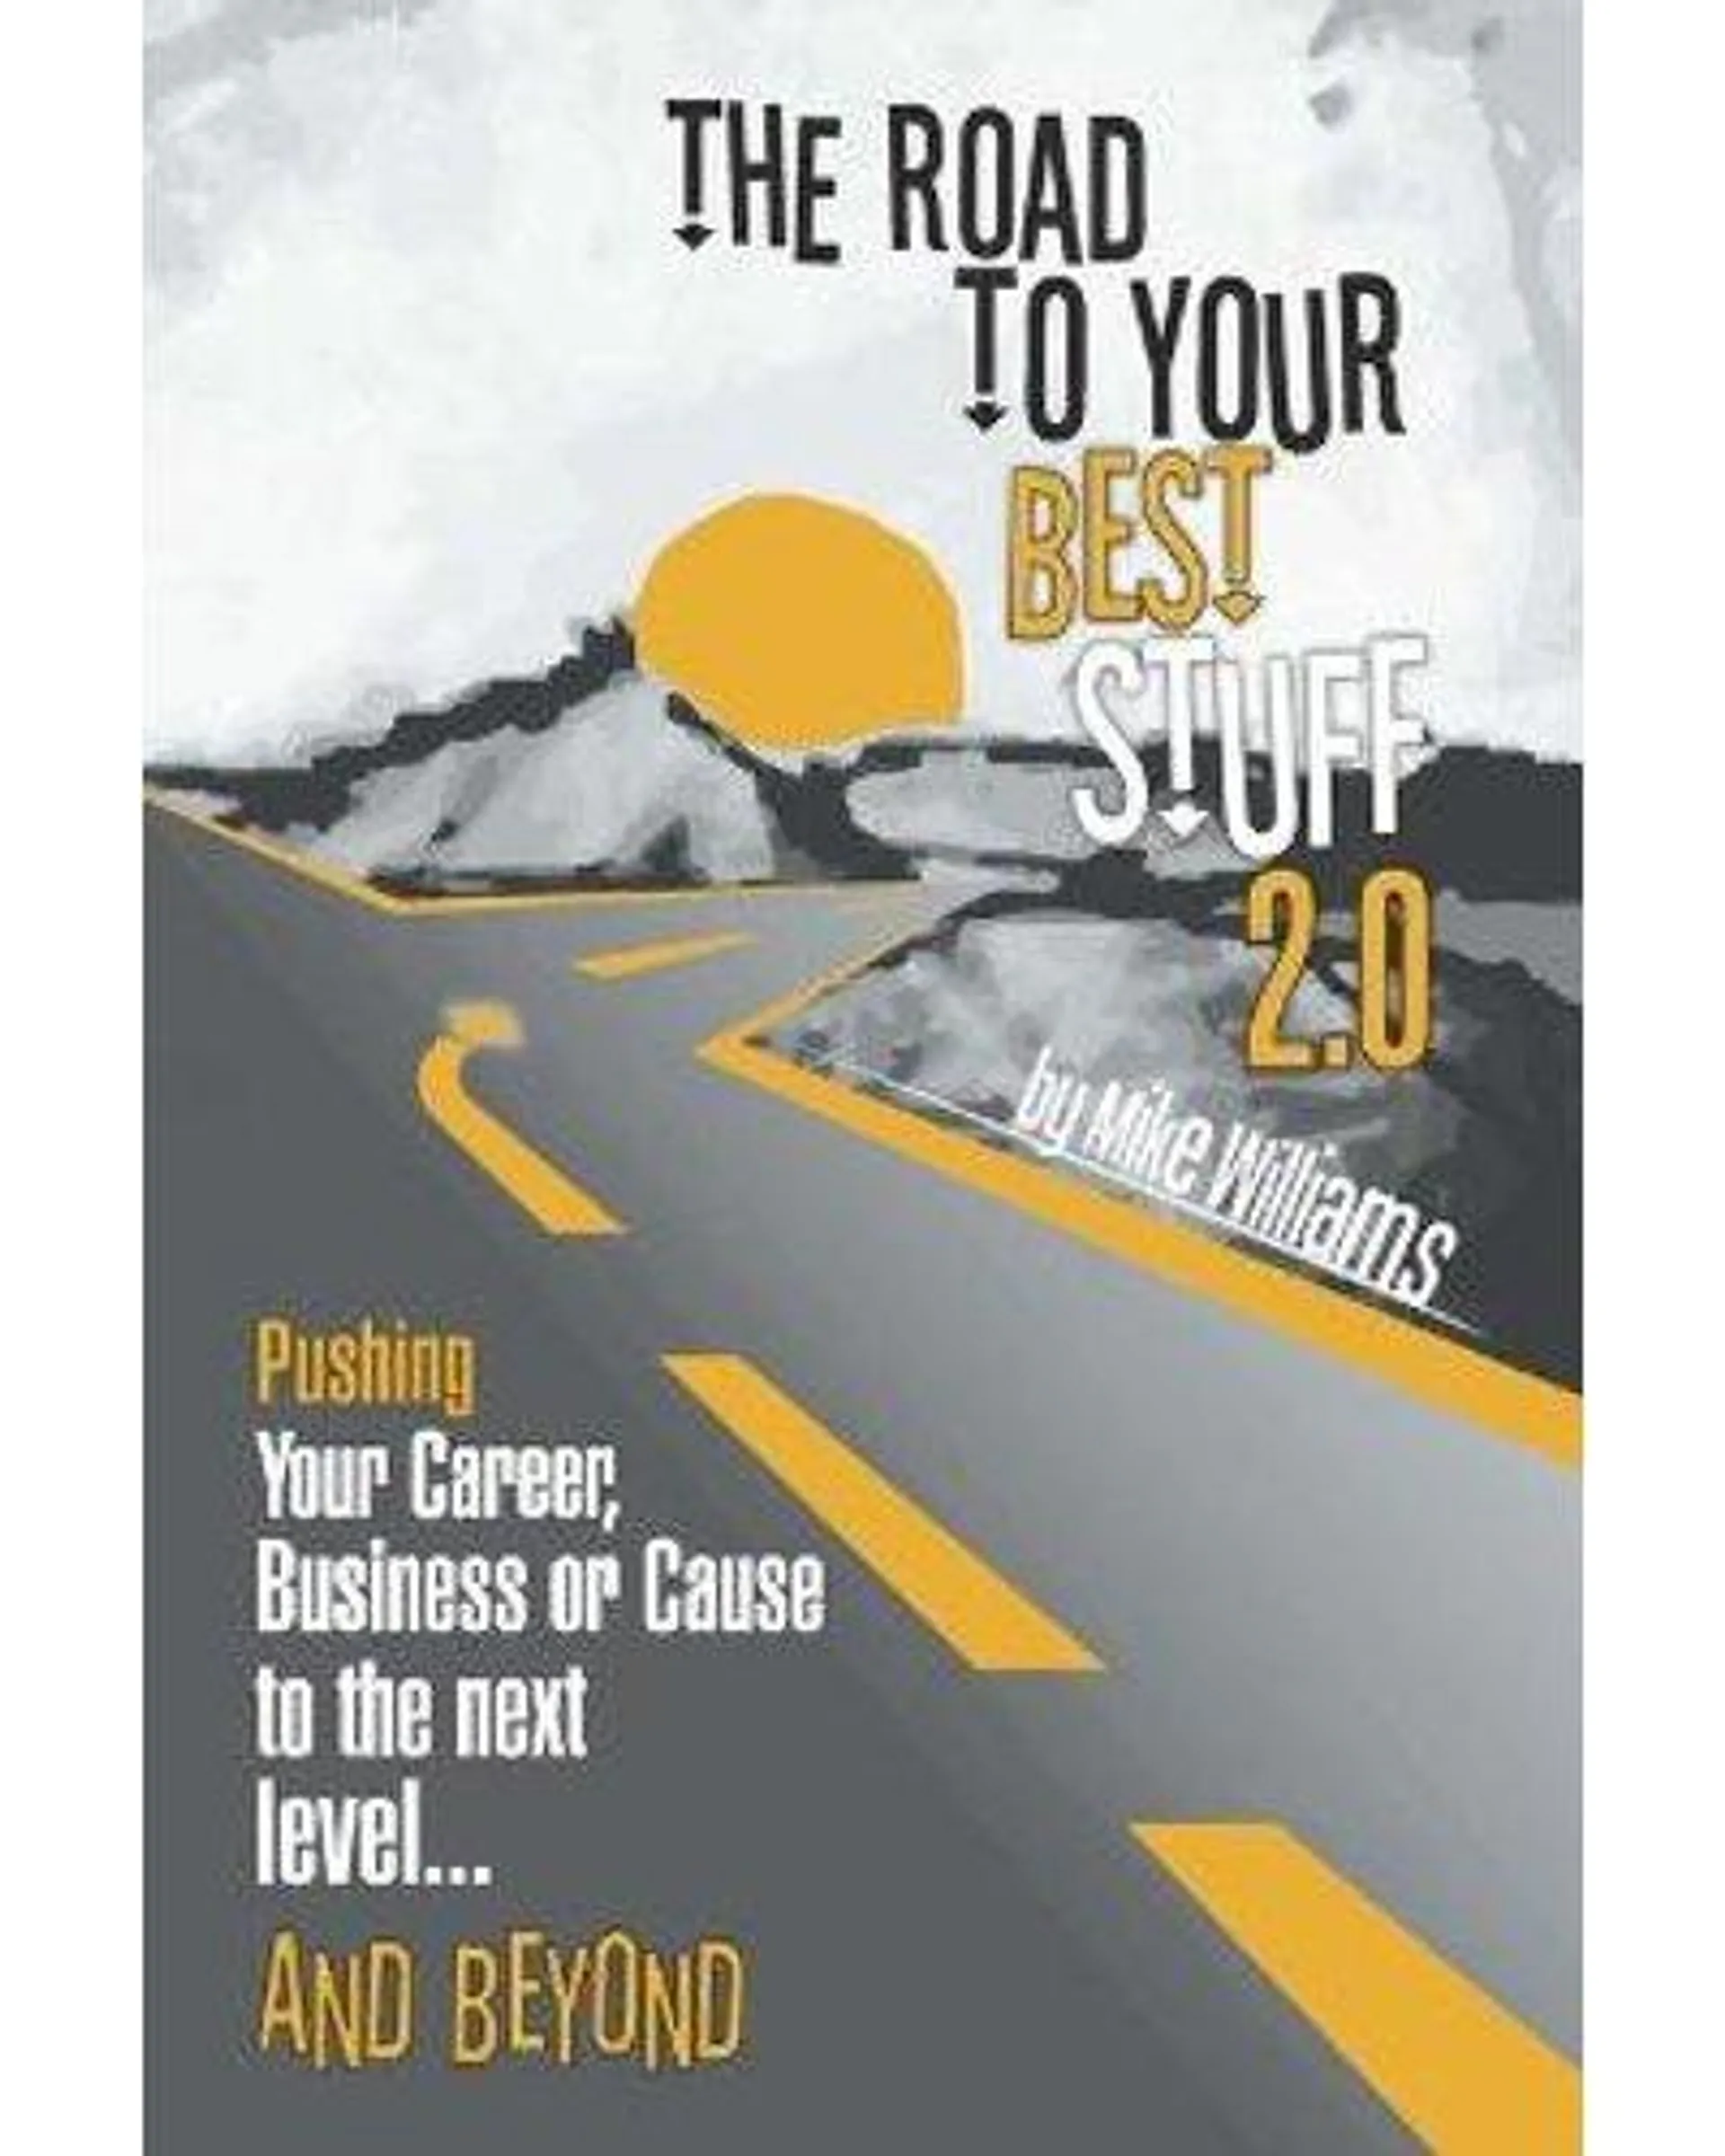 The Road to Your Best Stuff 2.0 - Pushing Your Career, Business or Cause to the Next Level...and Beyond (Paperback)